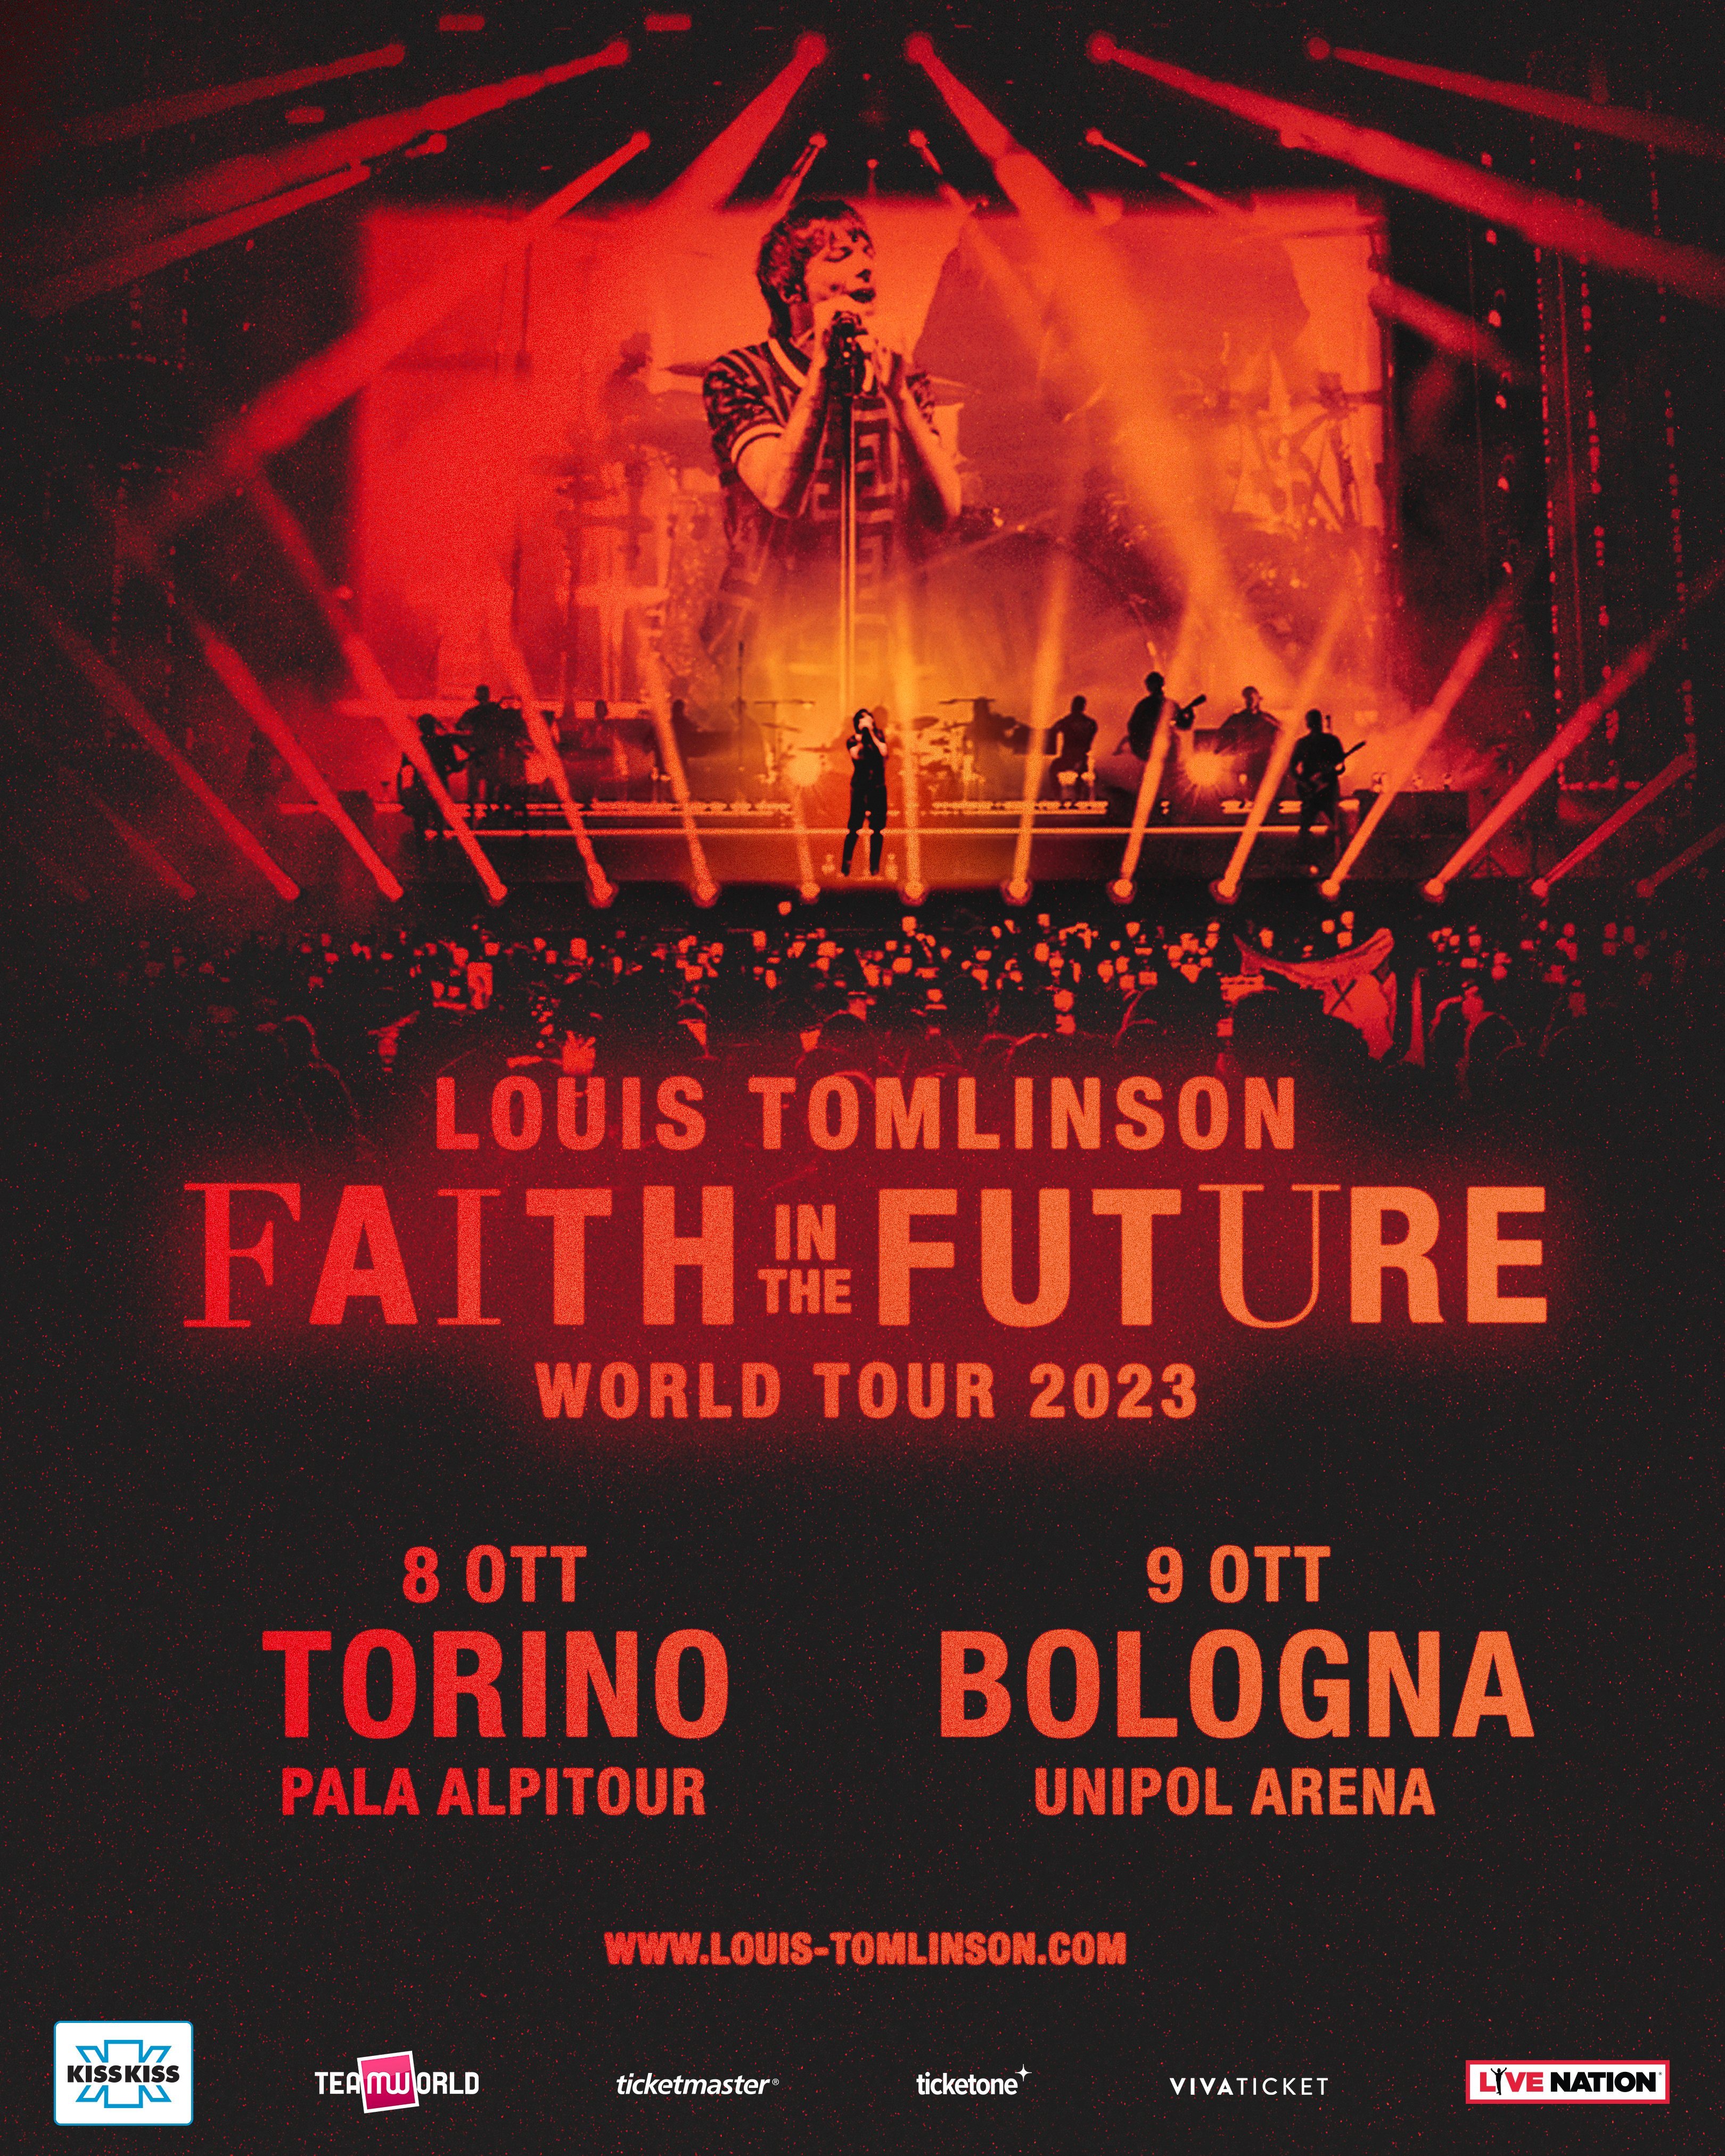 Louis Tomlinson - Faith In The Future (Black And Red Splatter with